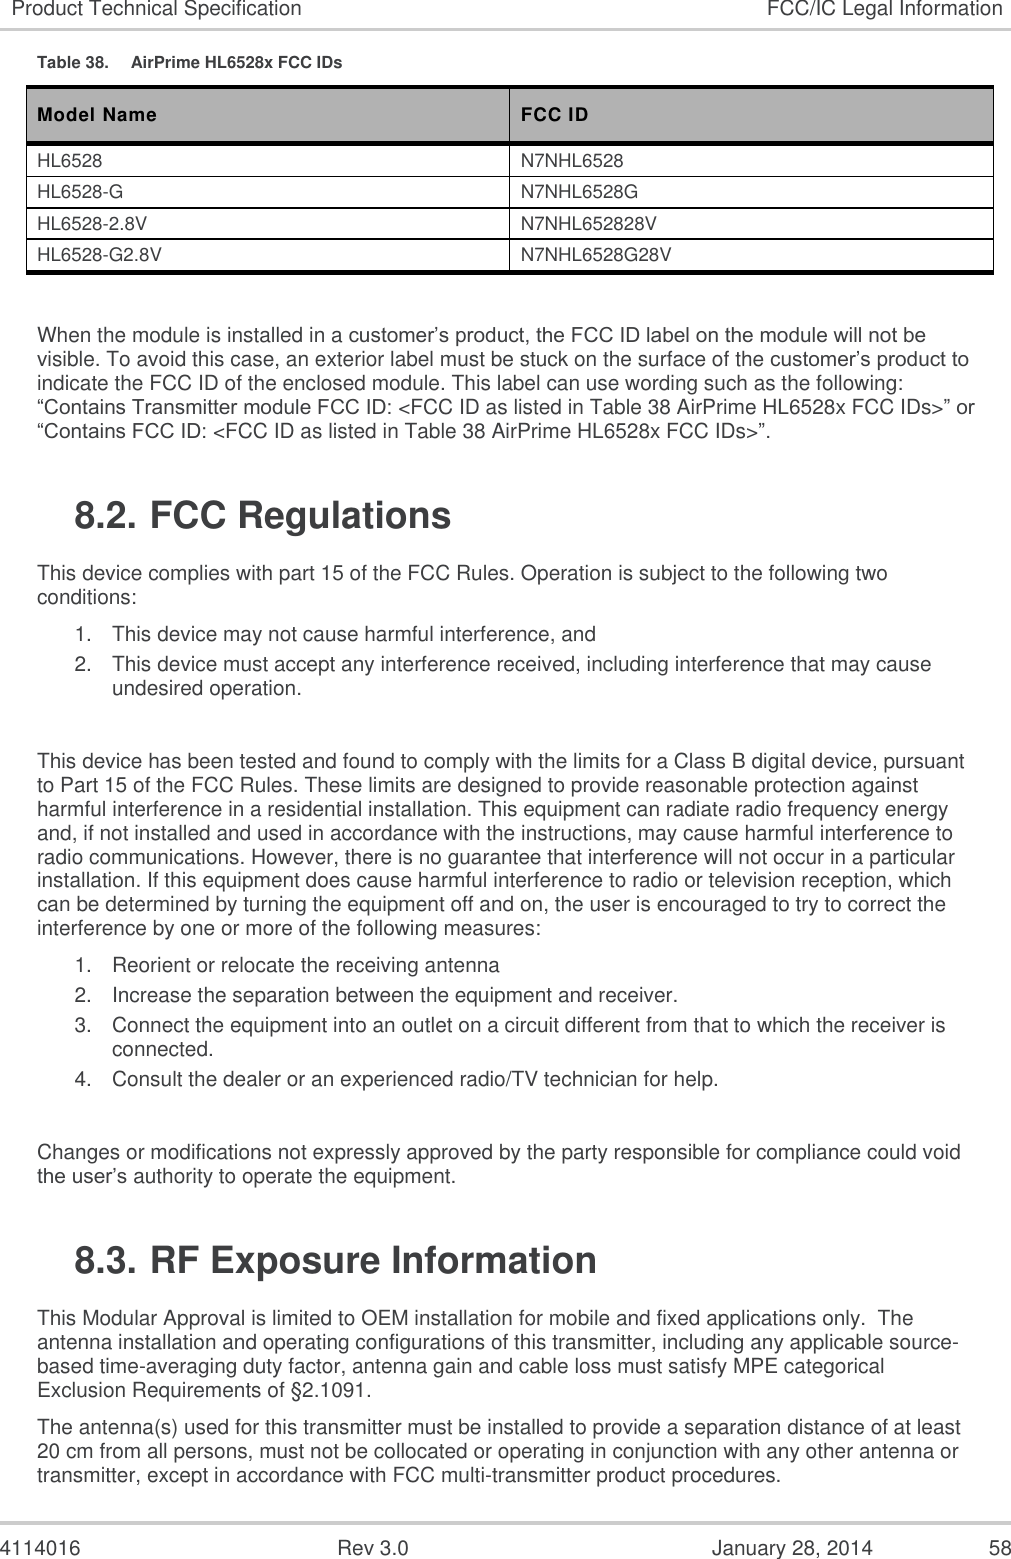  4114016  Rev 3.0  January 28, 2014  58 Product Technical Specification FCC/IC Legal Information Table 38.  AirPrime HL6528x FCC IDs Model Name FCC ID HL6528 N7NHL6528 HL6528-G N7NHL6528G HL6528-2.8V N7NHL652828V HL6528-G2.8V N7NHL6528G28V  When the module is installed in a customer’s product, the FCC ID label on the module will not be visible. To avoid this case, an exterior label must be stuck on the surface of the customer’s product to indicate the FCC ID of the enclosed module. This label can use wording such as the following: “Contains Transmitter module FCC ID: &lt;FCC ID as listed in Table 38 AirPrime HL6528x FCC IDs&gt;” or “Contains FCC ID: &lt;FCC ID as listed in Table 38 AirPrime HL6528x FCC IDs&gt;”. 8.2. FCC Regulations This device complies with part 15 of the FCC Rules. Operation is subject to the following two conditions: 1. This device may not cause harmful interference, and 2. This device must accept any interference received, including interference that may cause undesired operation.  This device has been tested and found to comply with the limits for a Class B digital device, pursuant to Part 15 of the FCC Rules. These limits are designed to provide reasonable protection against harmful interference in a residential installation. This equipment can radiate radio frequency energy and, if not installed and used in accordance with the instructions, may cause harmful interference to radio communications. However, there is no guarantee that interference will not occur in a particular installation. If this equipment does cause harmful interference to radio or television reception, which can be determined by turning the equipment off and on, the user is encouraged to try to correct the interference by one or more of the following measures: 1. Reorient or relocate the receiving antenna 2. Increase the separation between the equipment and receiver. 3. Connect the equipment into an outlet on a circuit different from that to which the receiver is connected. 4. Consult the dealer or an experienced radio/TV technician for help.  Changes or modifications not expressly approved by the party responsible for compliance could void the user’s authority to operate the equipment. 8.3. RF Exposure Information This Modular Approval is limited to OEM installation for mobile and fixed applications only.  The antenna installation and operating configurations of this transmitter, including any applicable source-based time-averaging duty factor, antenna gain and cable loss must satisfy MPE categorical Exclusion Requirements of §2.1091. The antenna(s) used for this transmitter must be installed to provide a separation distance of at least 20 cm from all persons, must not be collocated or operating in conjunction with any other antenna or transmitter, except in accordance with FCC multi-transmitter product procedures. 